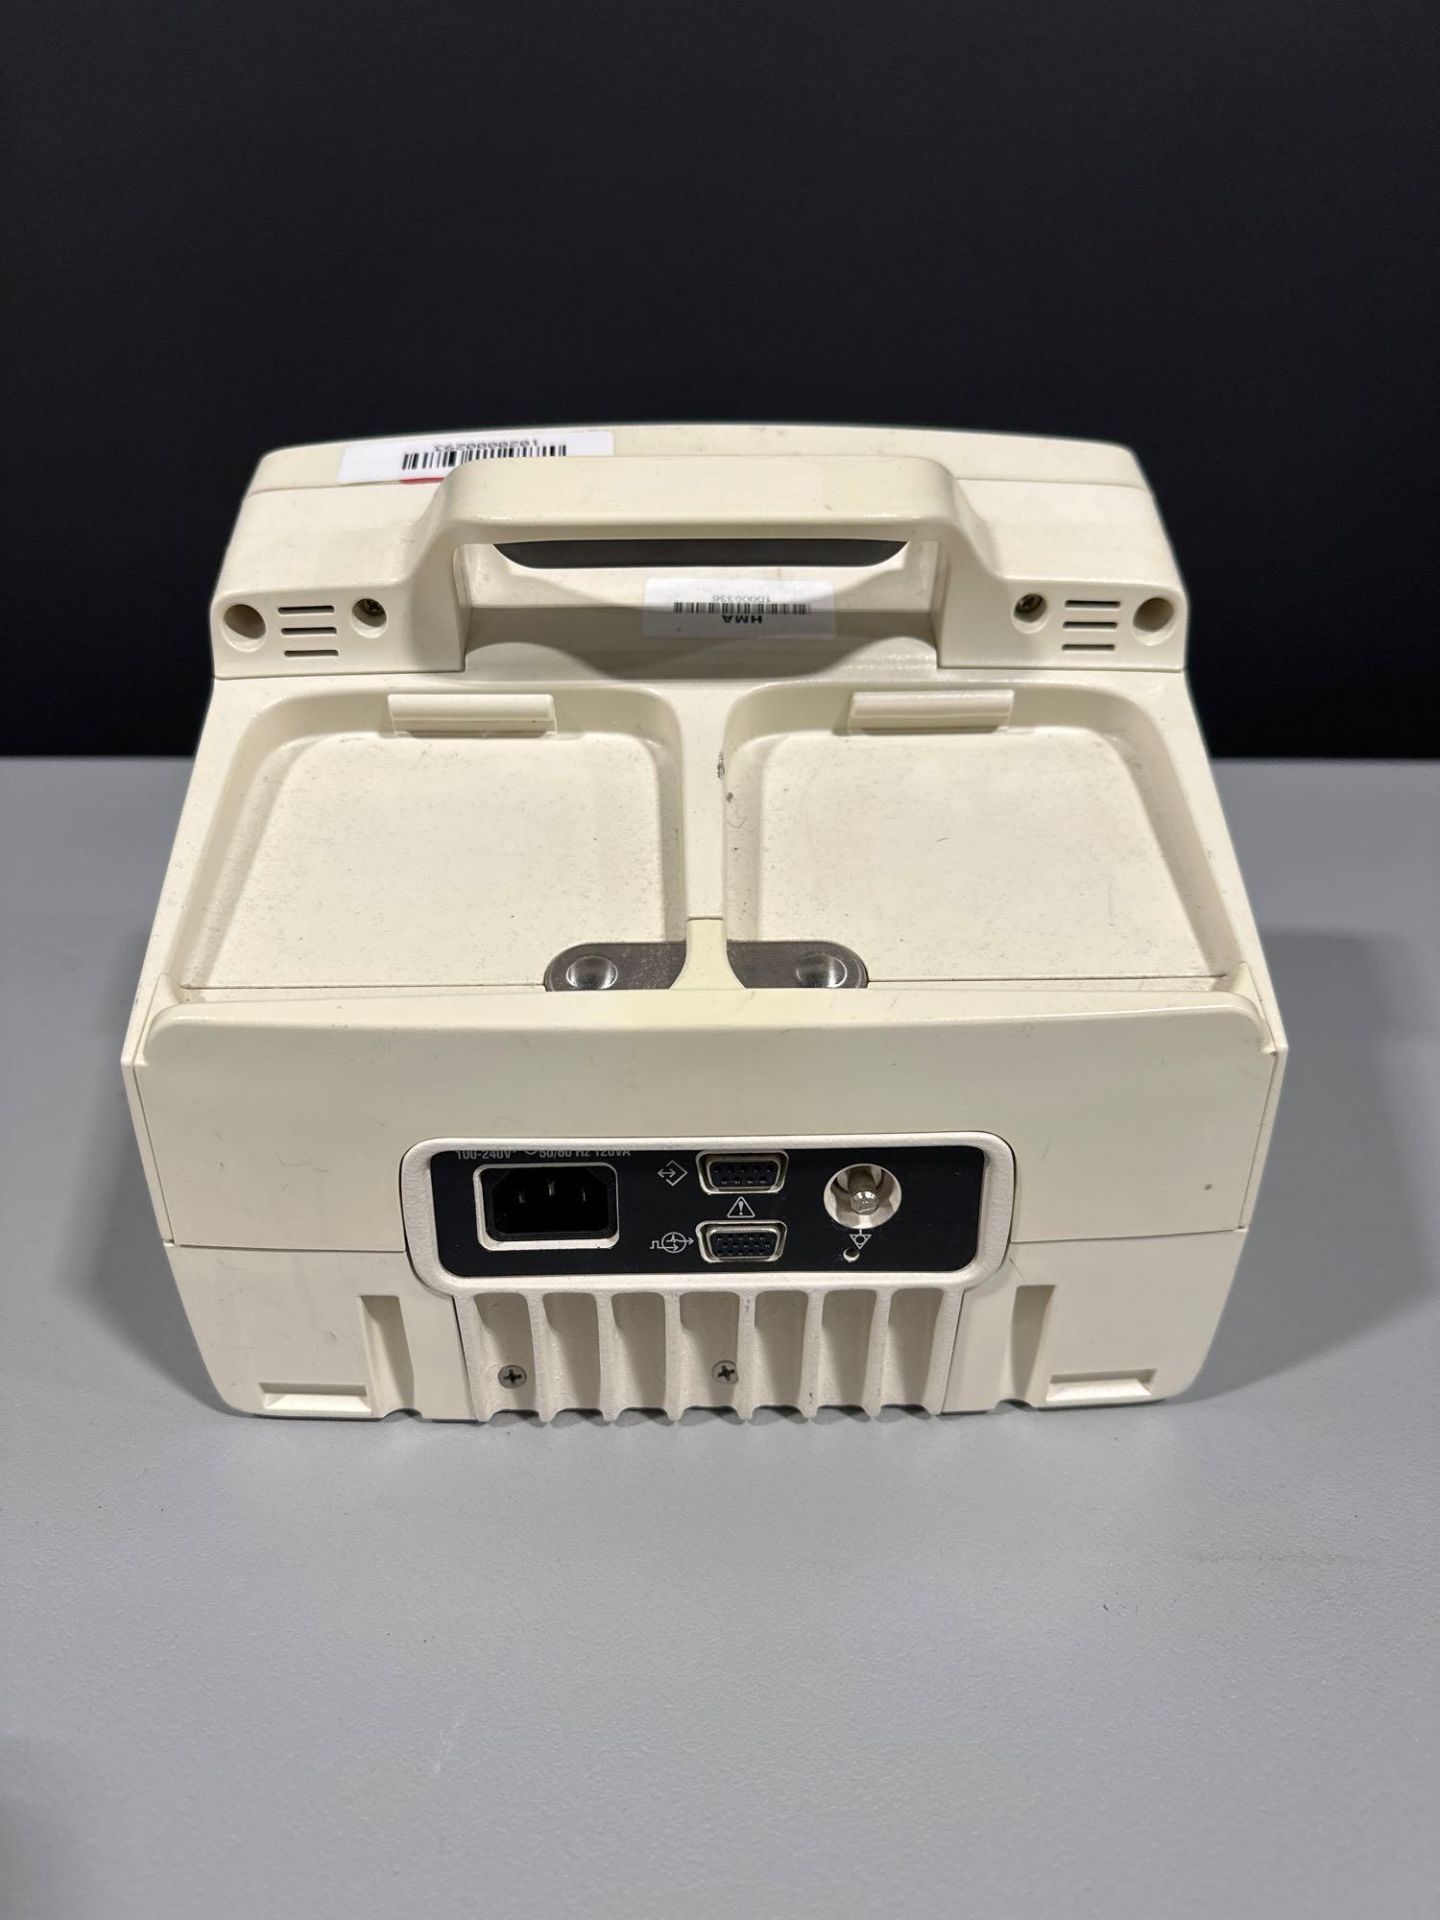 MEDTRONIC/PHYSIO CONTROL LIFEPAK 20 DEFIB WITH PACING, 3 LEAD ECG, ANALYZE (AED MODE) - Image 8 of 8